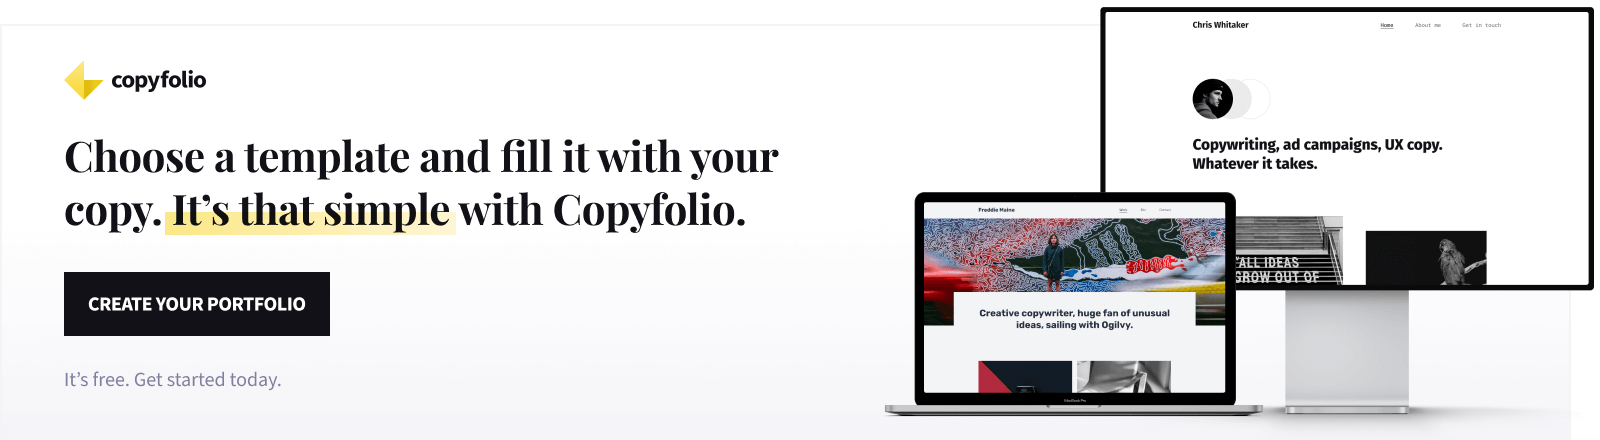 Choose a template and fill it with your copy. It's that simple with Copyfolio. Create your portfolio! It's free.